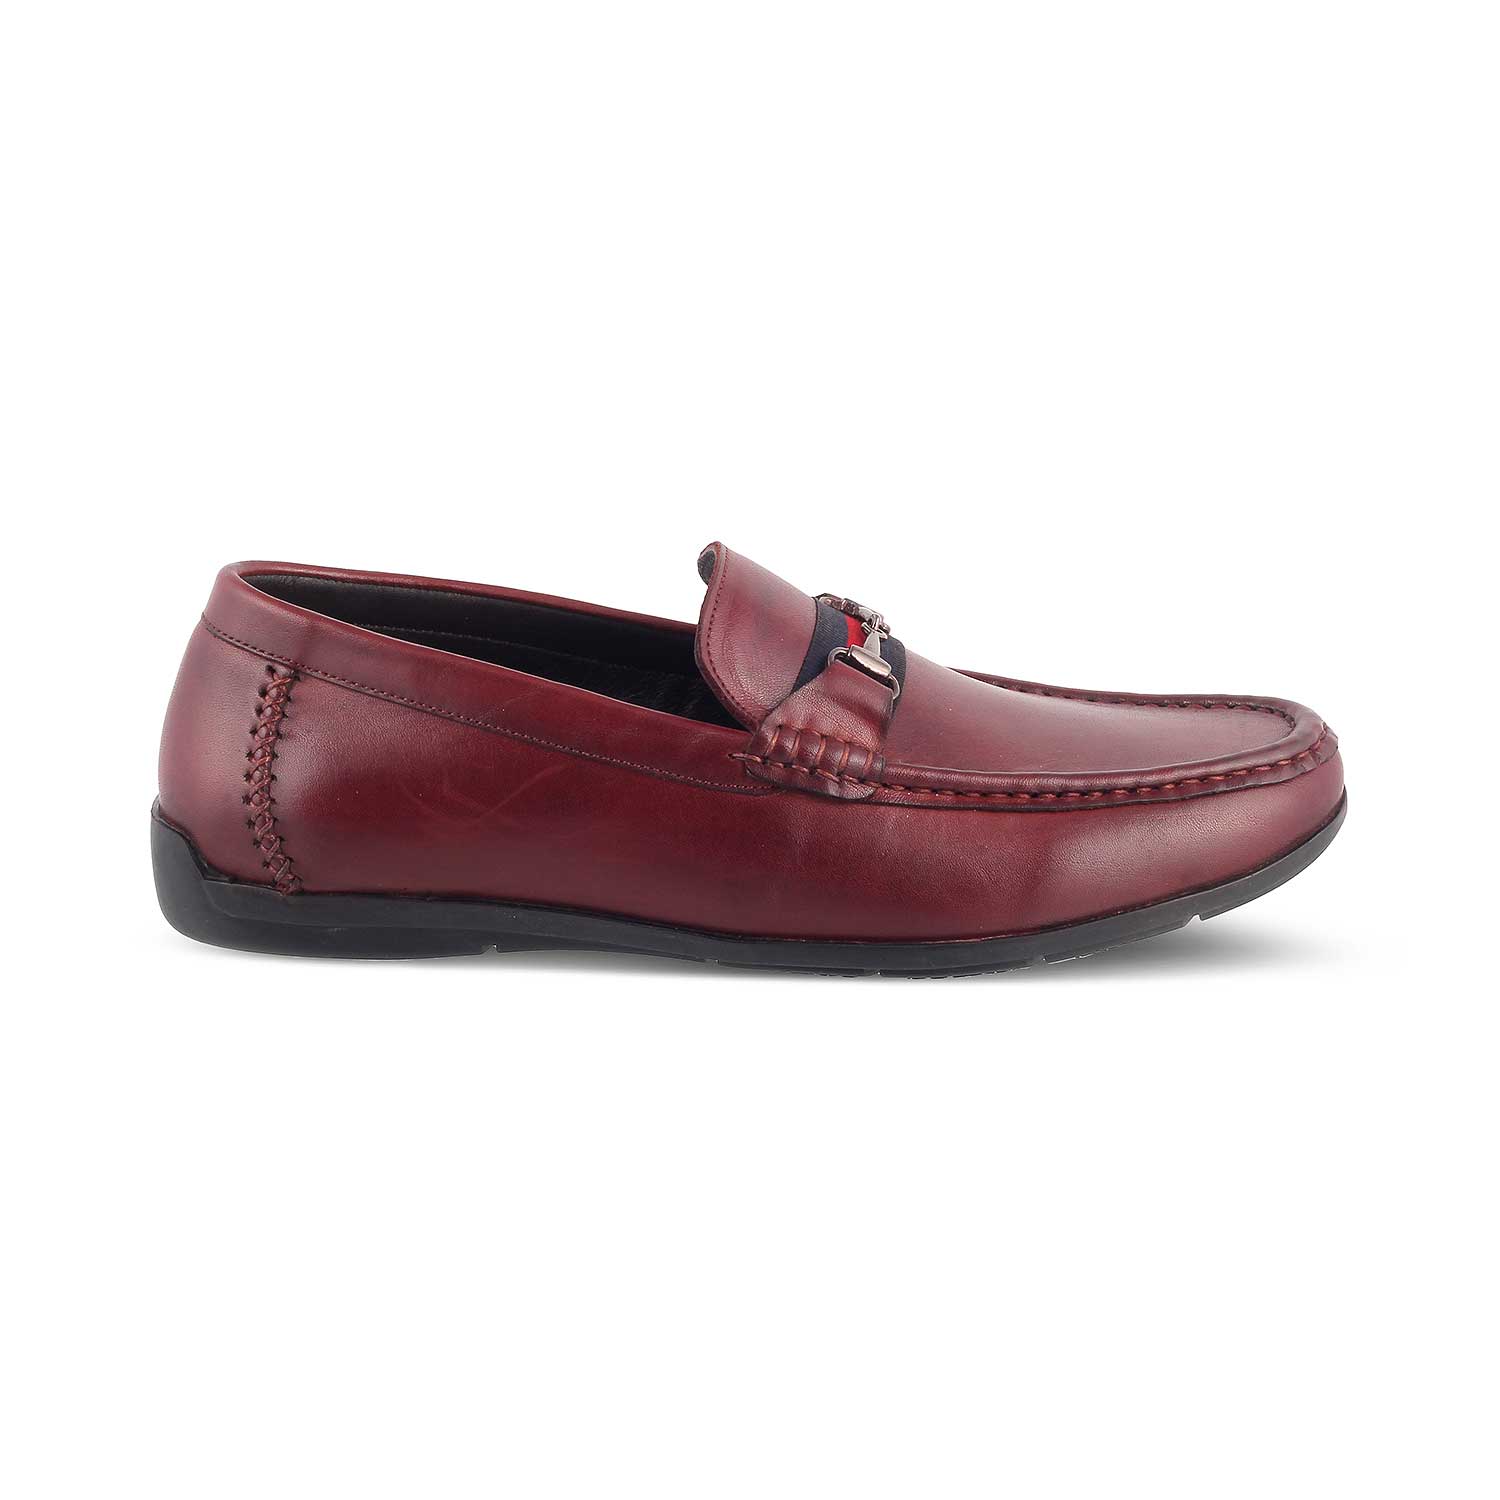 Tresmode-The Crada Wine Men's Leather Driving Loafers Tresmode-Tresmode